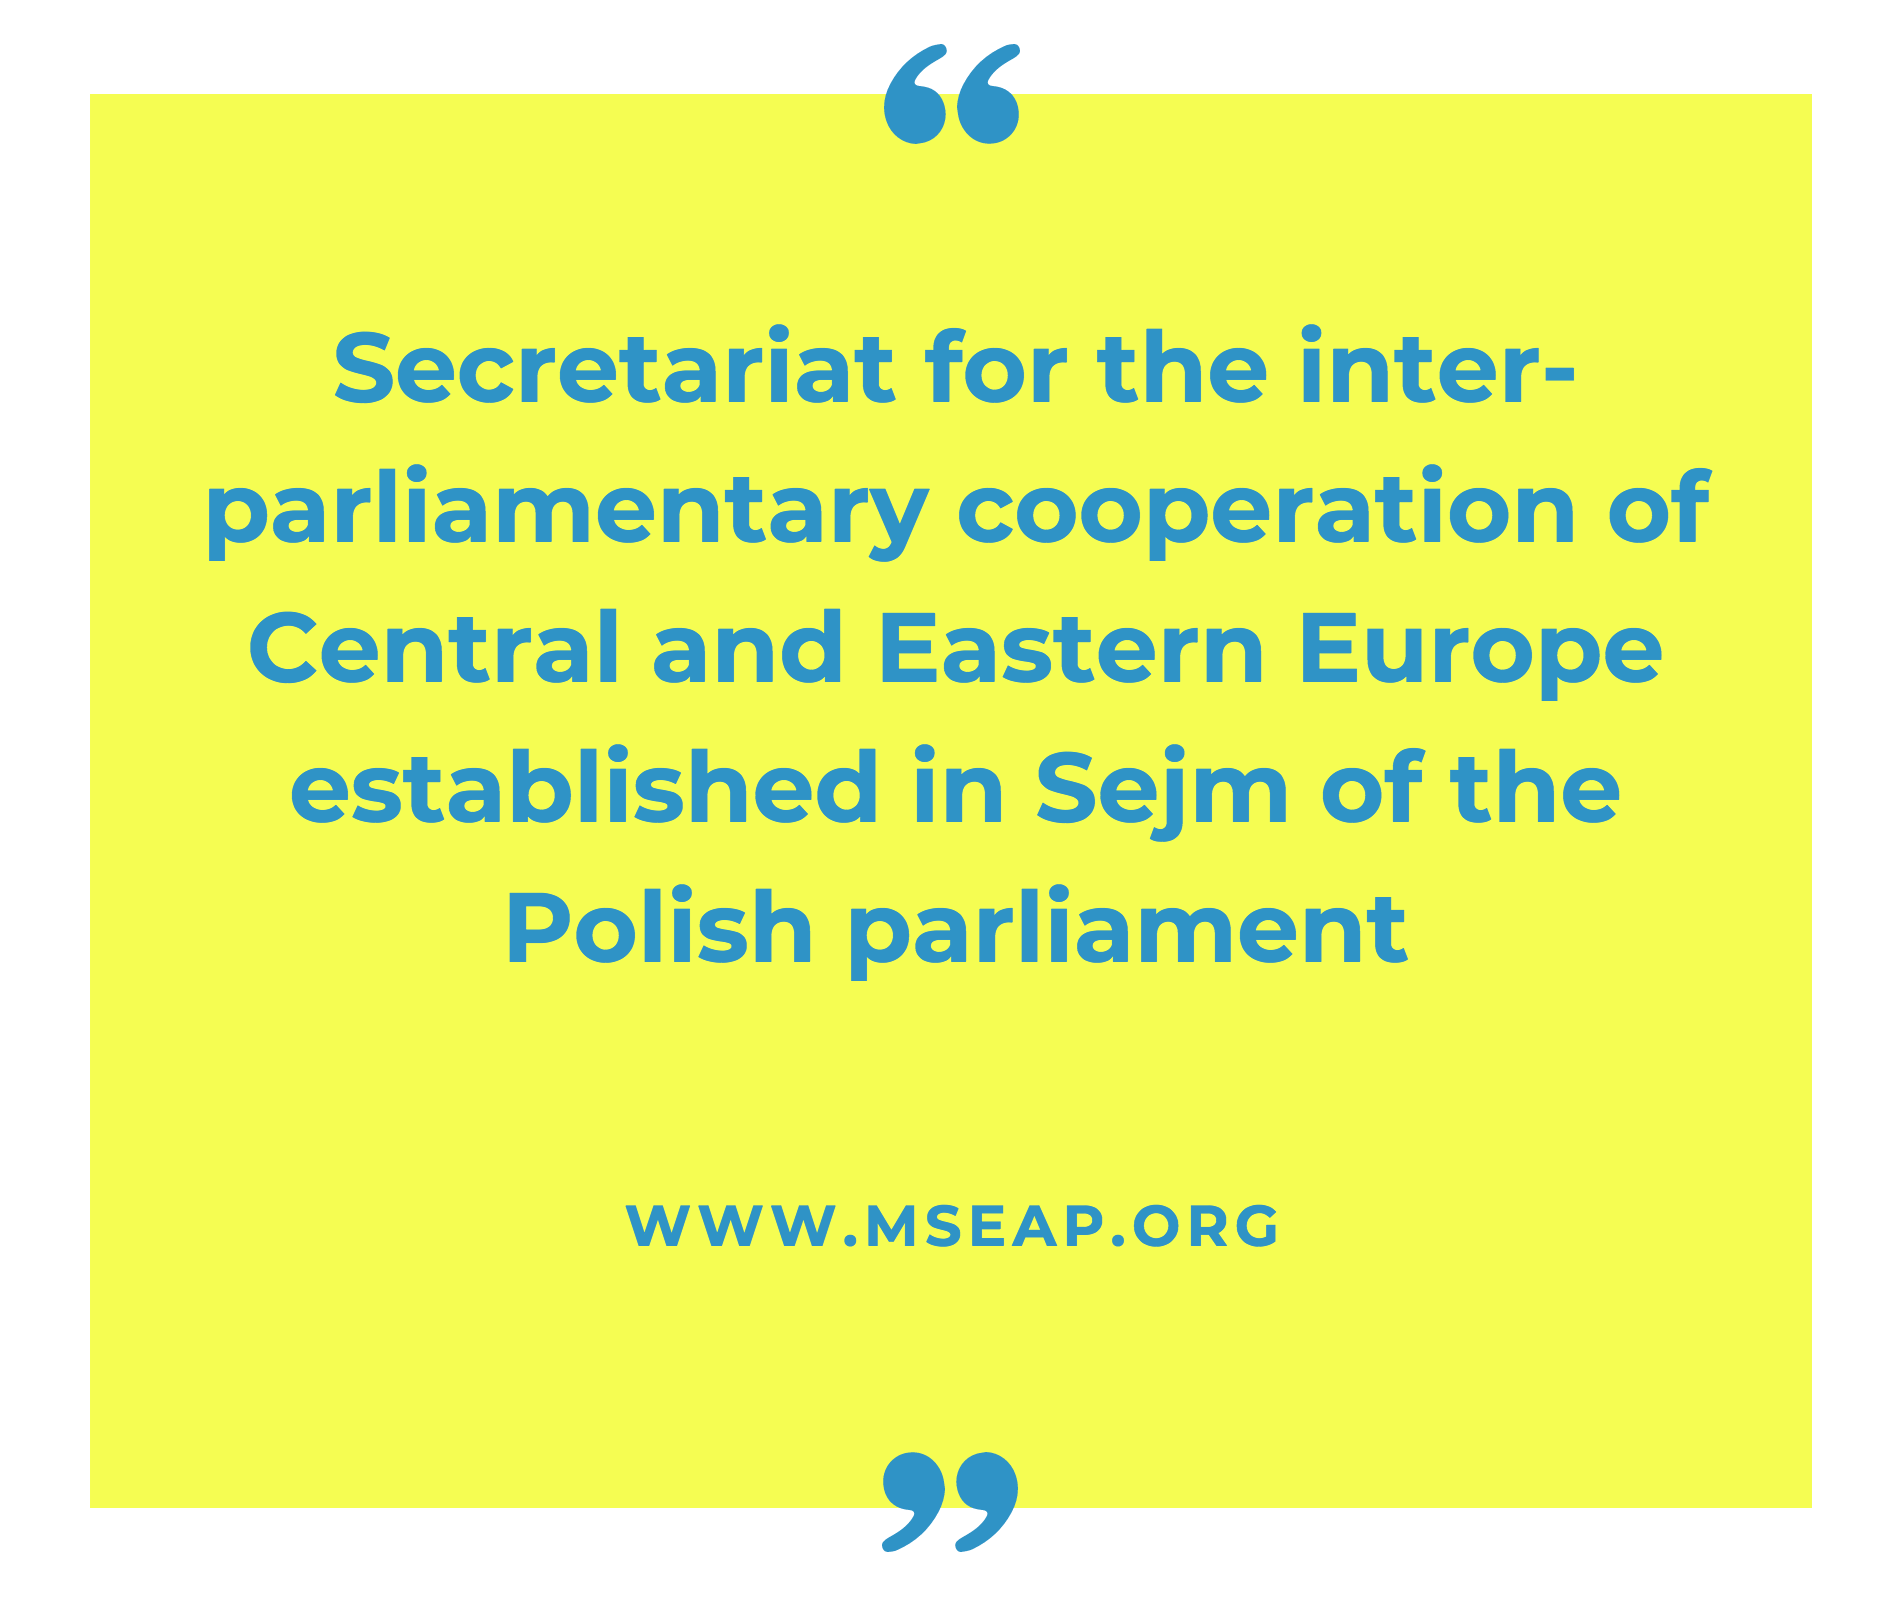 Secretariat for Inter-parliamentary cooperation of CEE established in Sejm